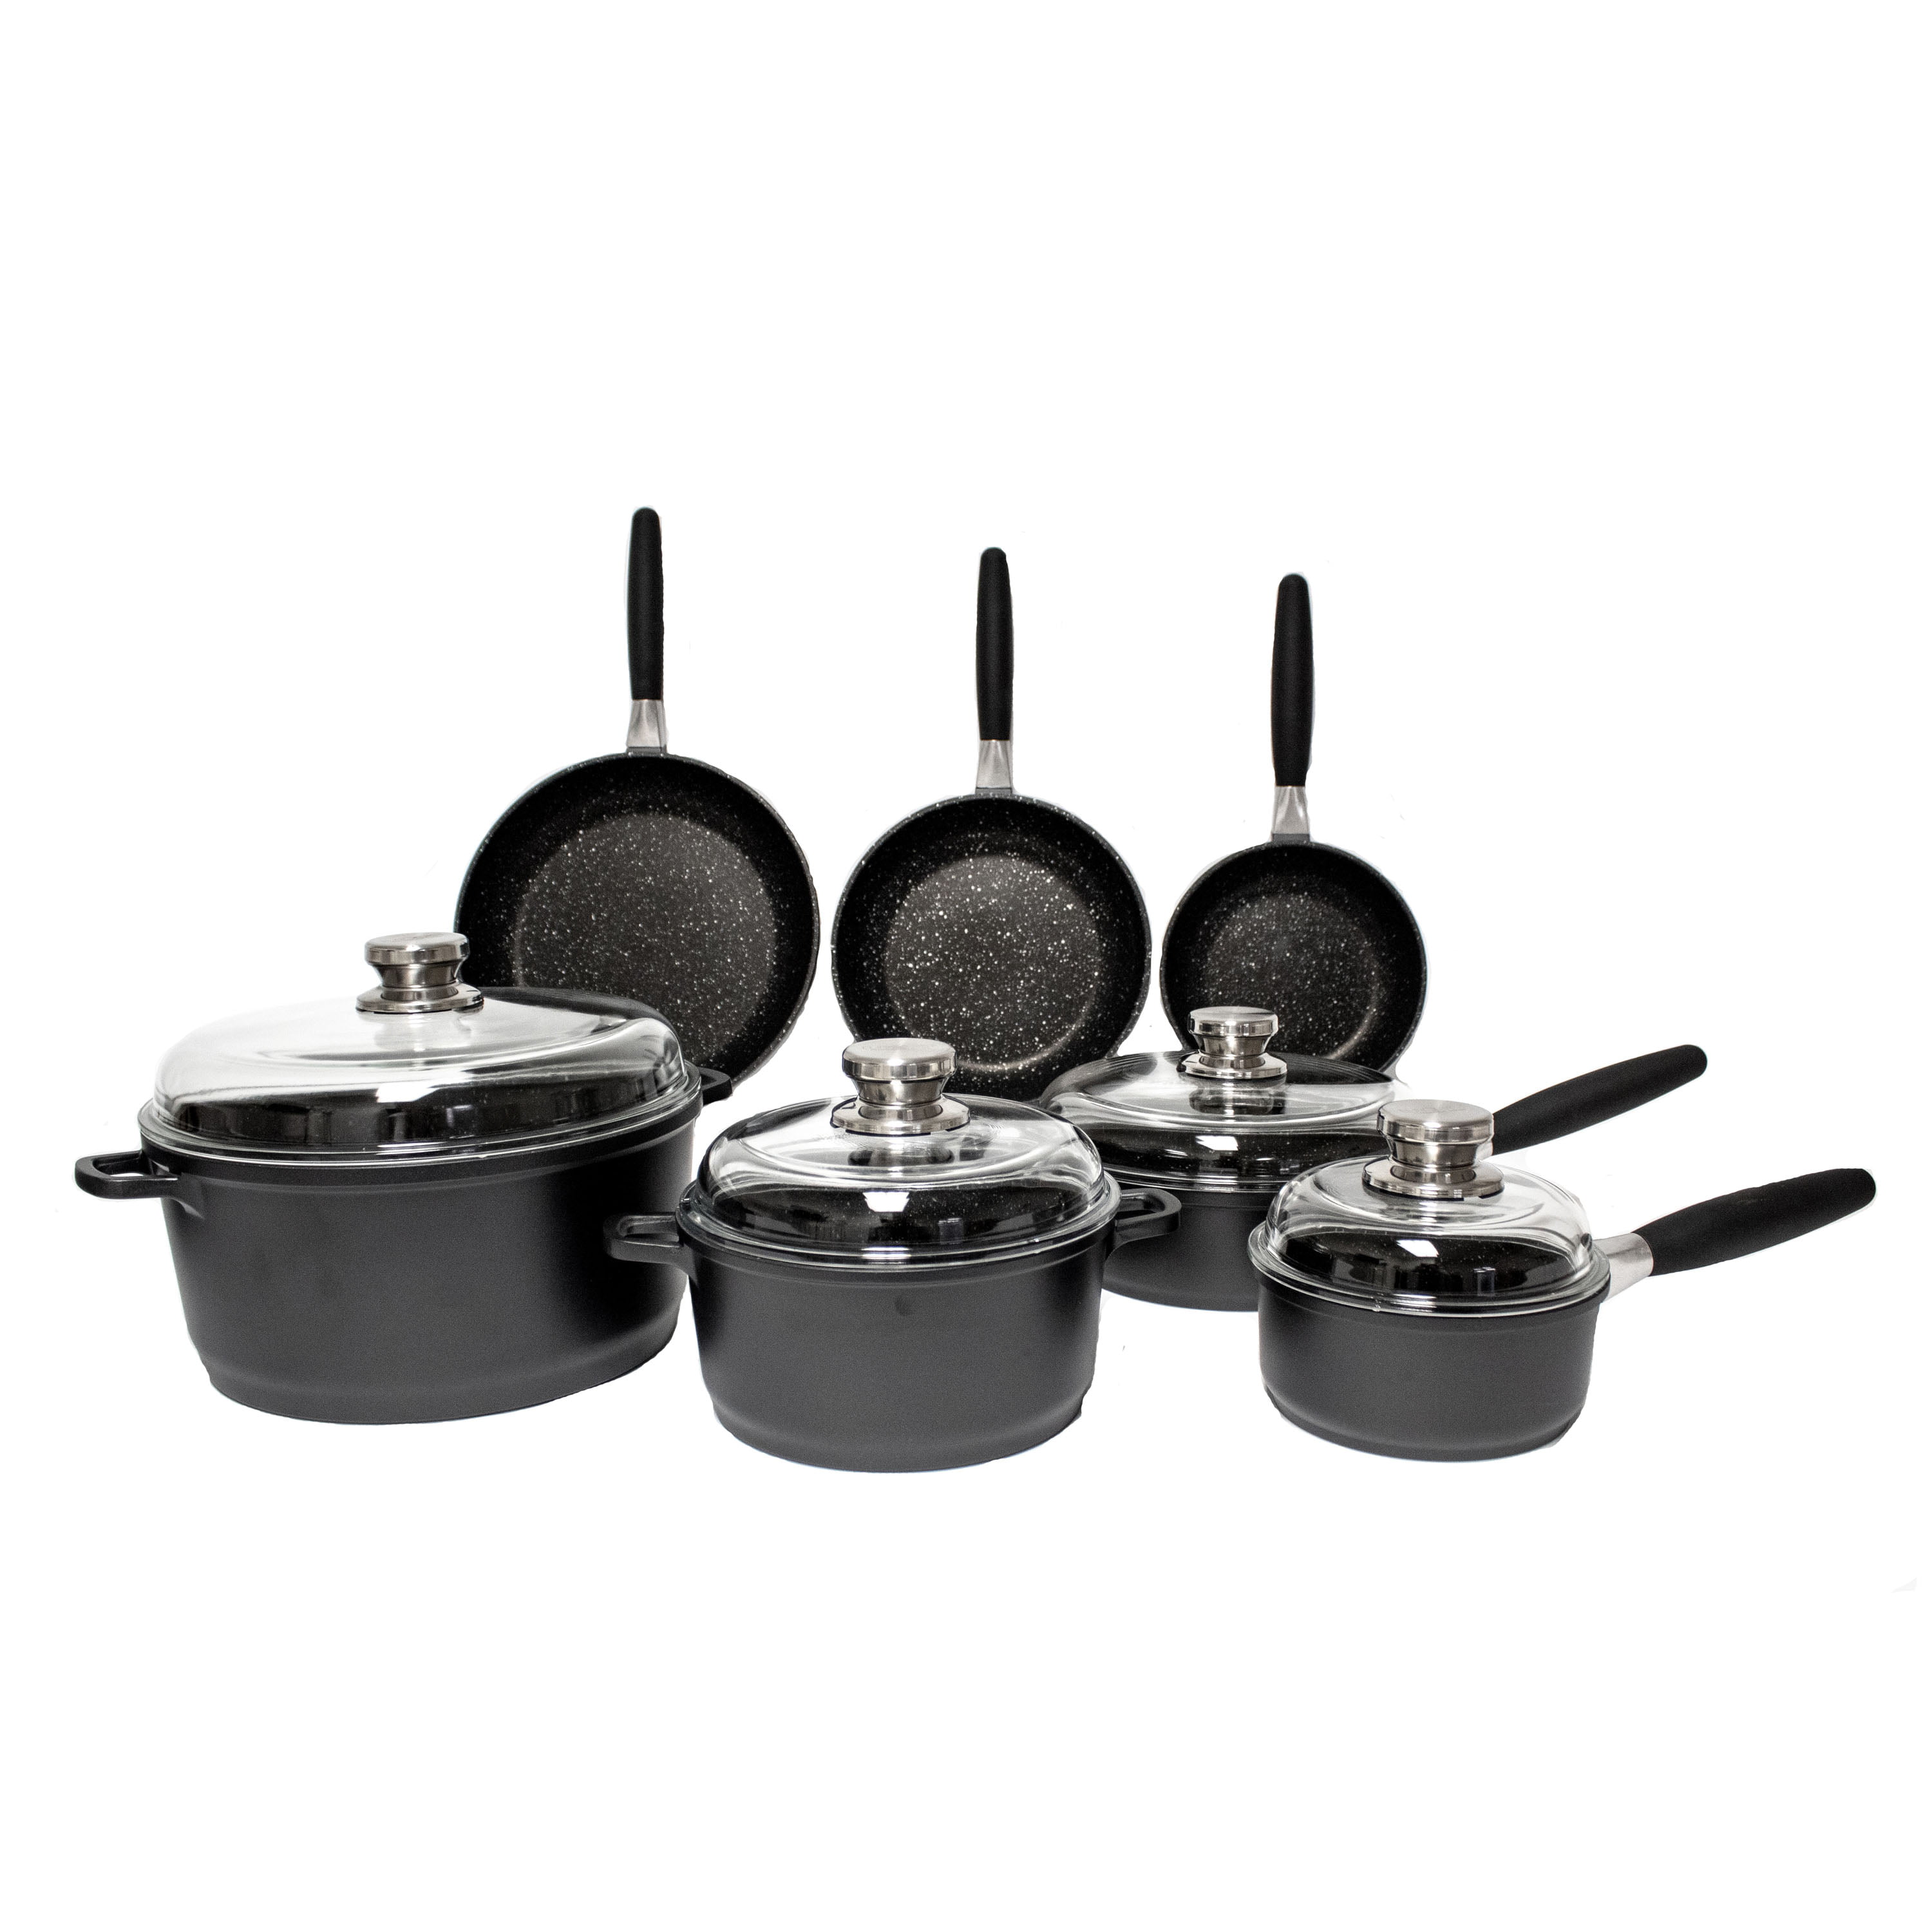 EuroCAST by BergHOFF Chef Set with 3 Lids | Ceramic and Titanium Cooking  Surface | Durable, Lightweight Cast Construction | Detachable Handle for  Oven